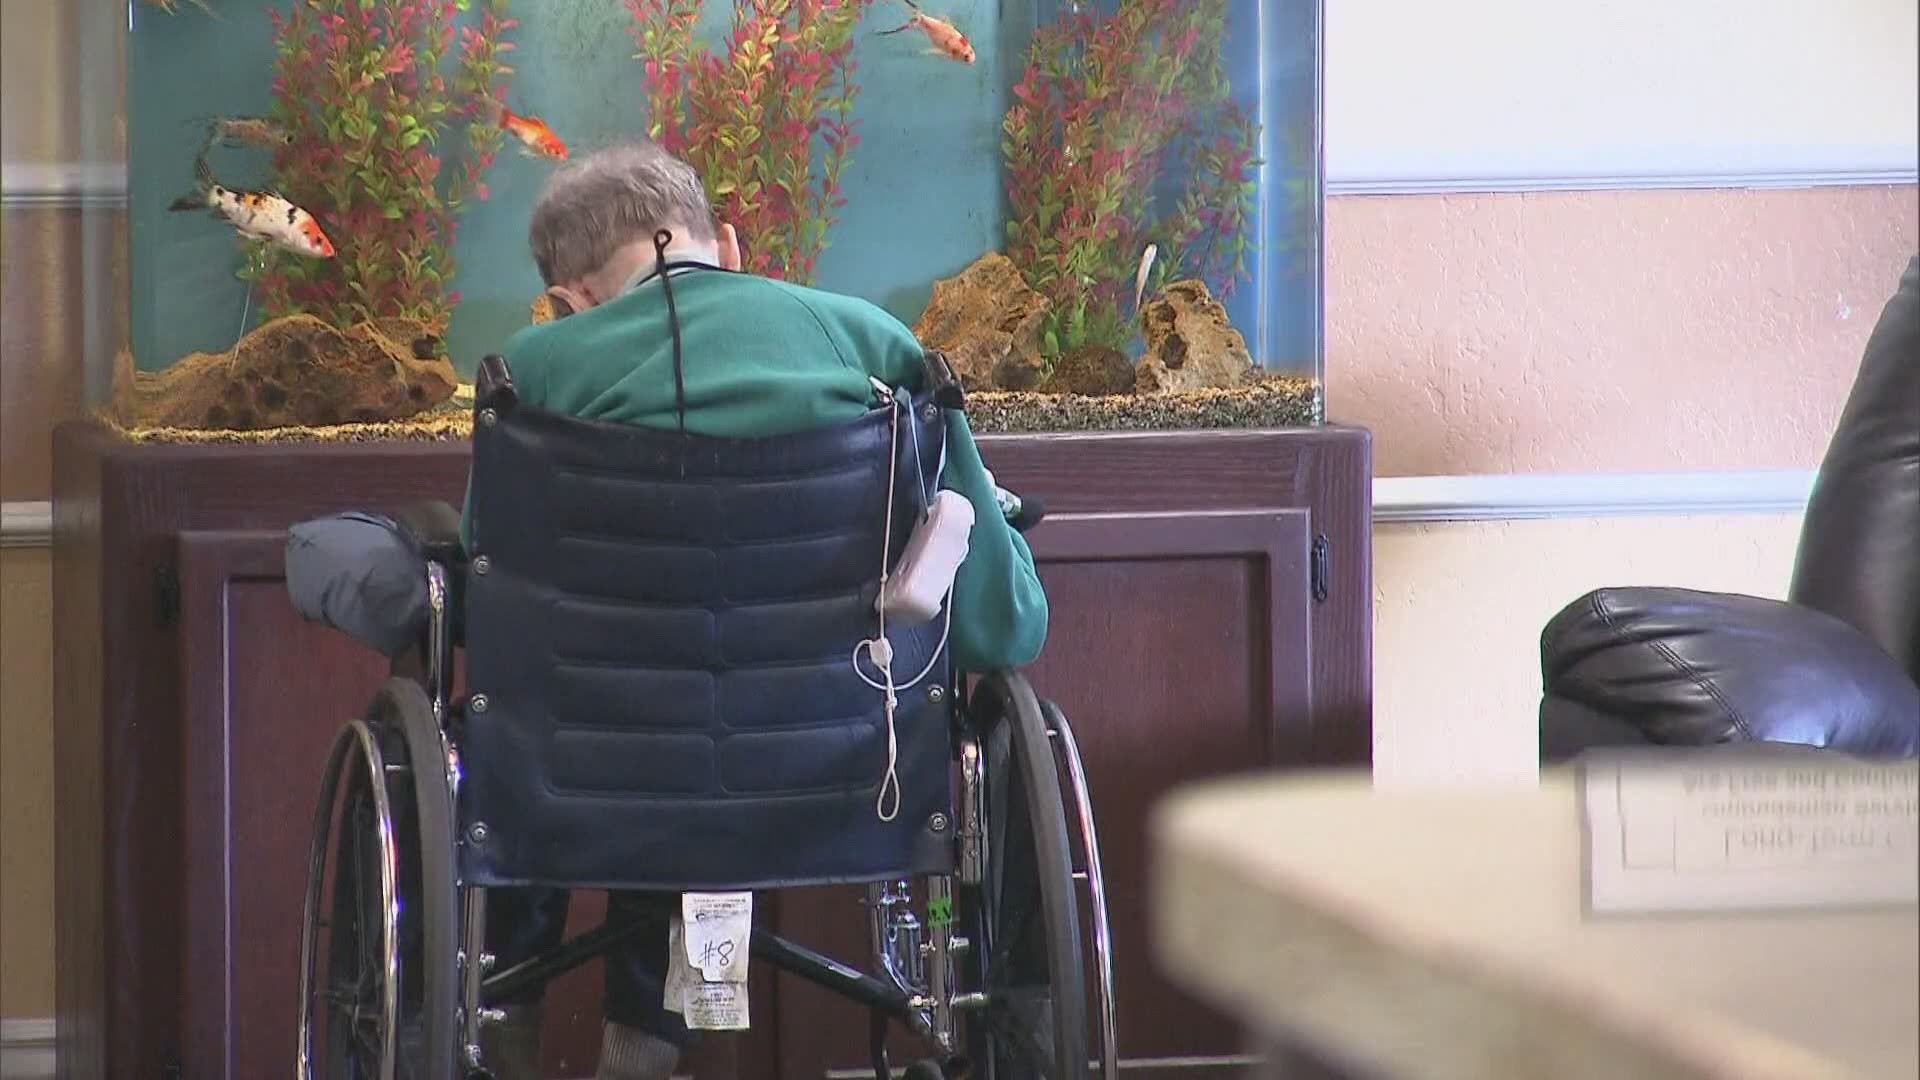 Senator Brad Ferrin says that Maine's nursing homes could use more help with funding than the $12.5 million that the Governor plans to allocate to them.